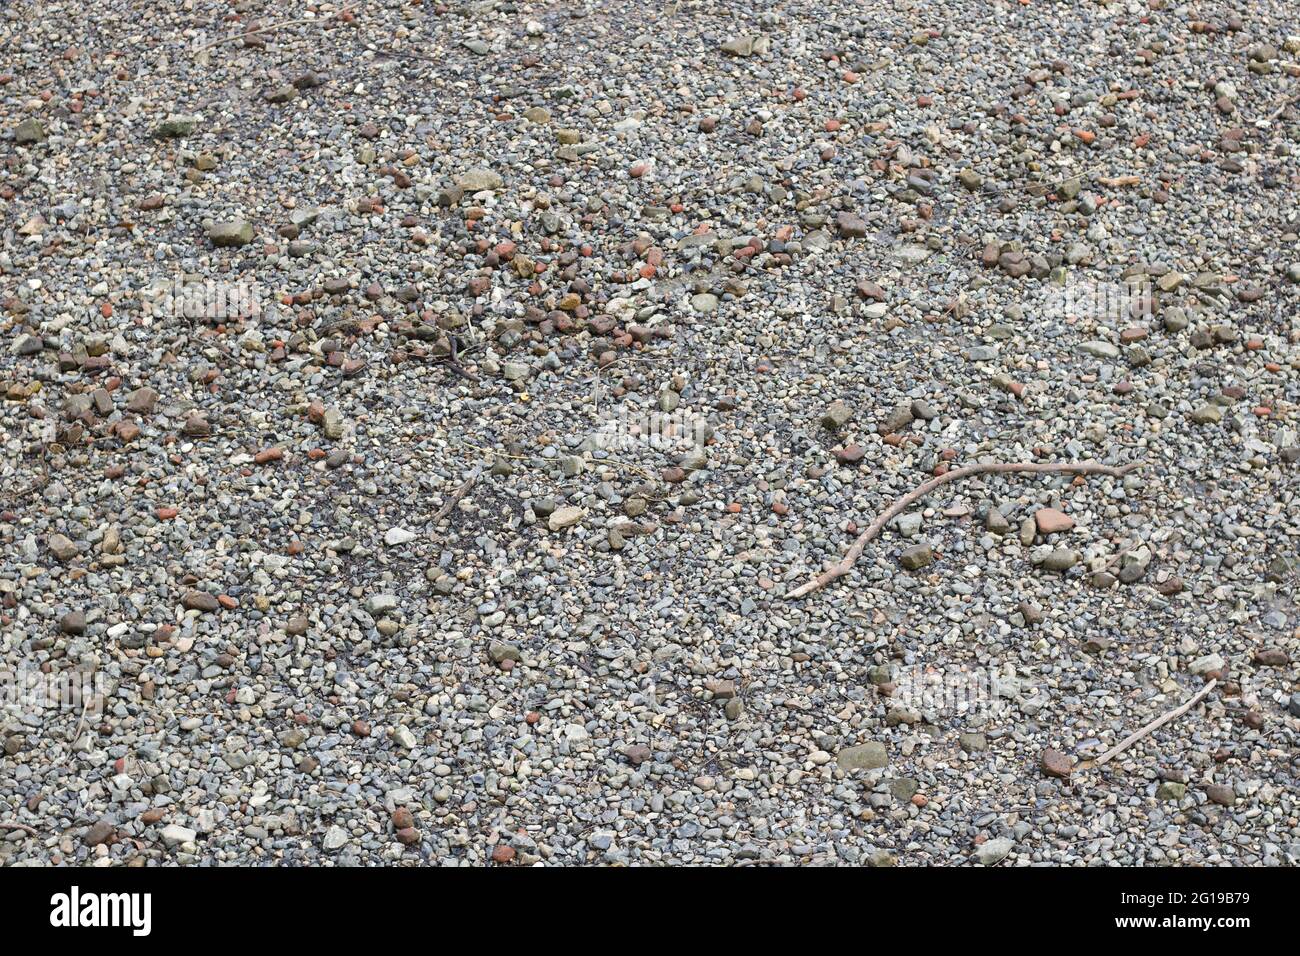 Full frame background showing small stones of assorted shapes and colours Stock Photo